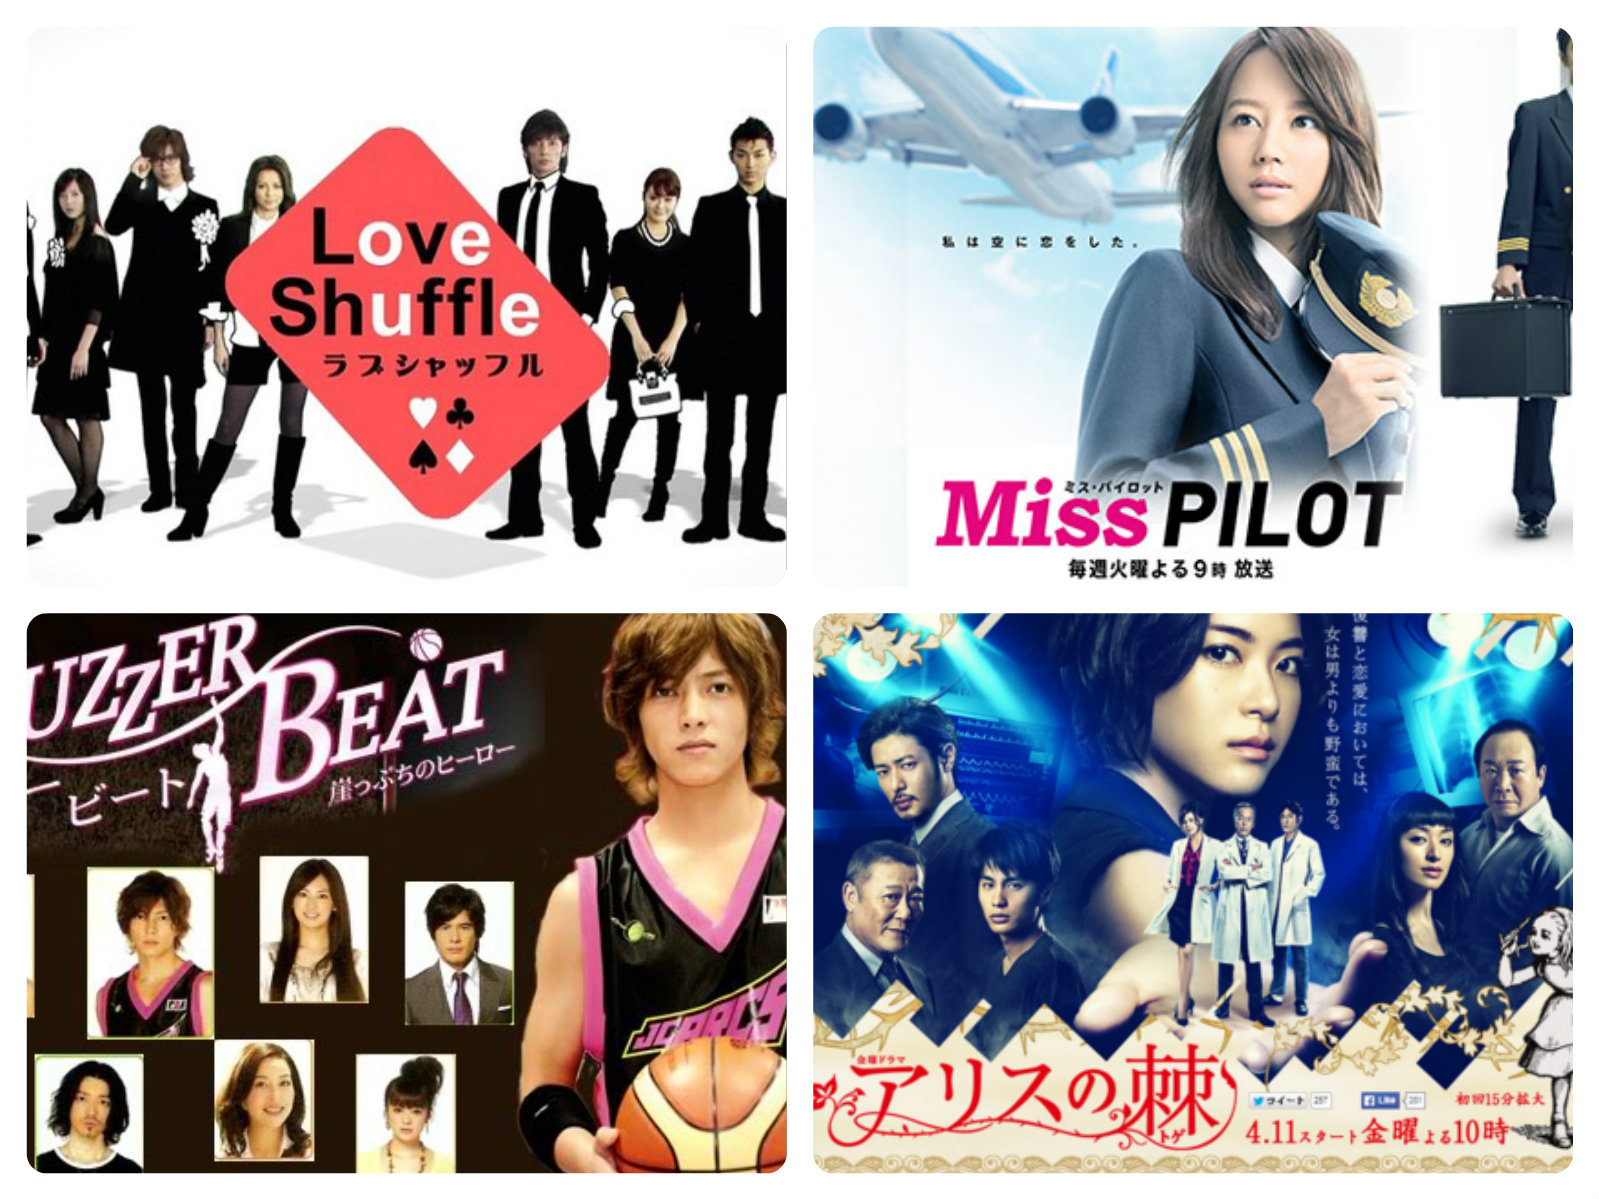 Love Shuffle, Buzzer Beat, Miss Pilot and Alice no Toge Compiled Reviews –  dramamochi